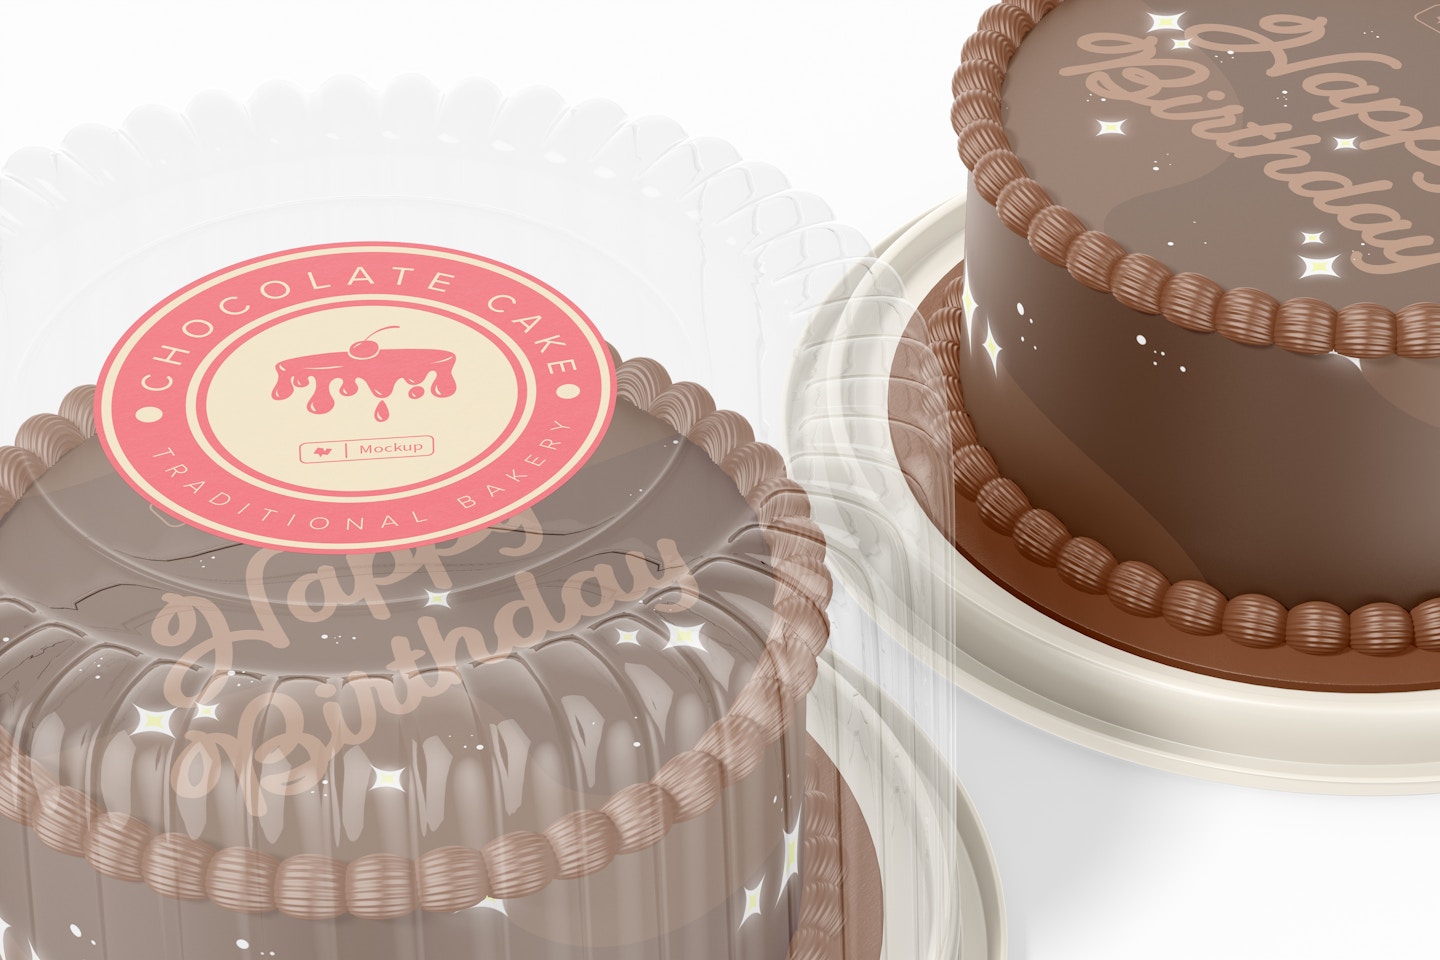 Plastic Round Cake Containers Mockup, Close Up